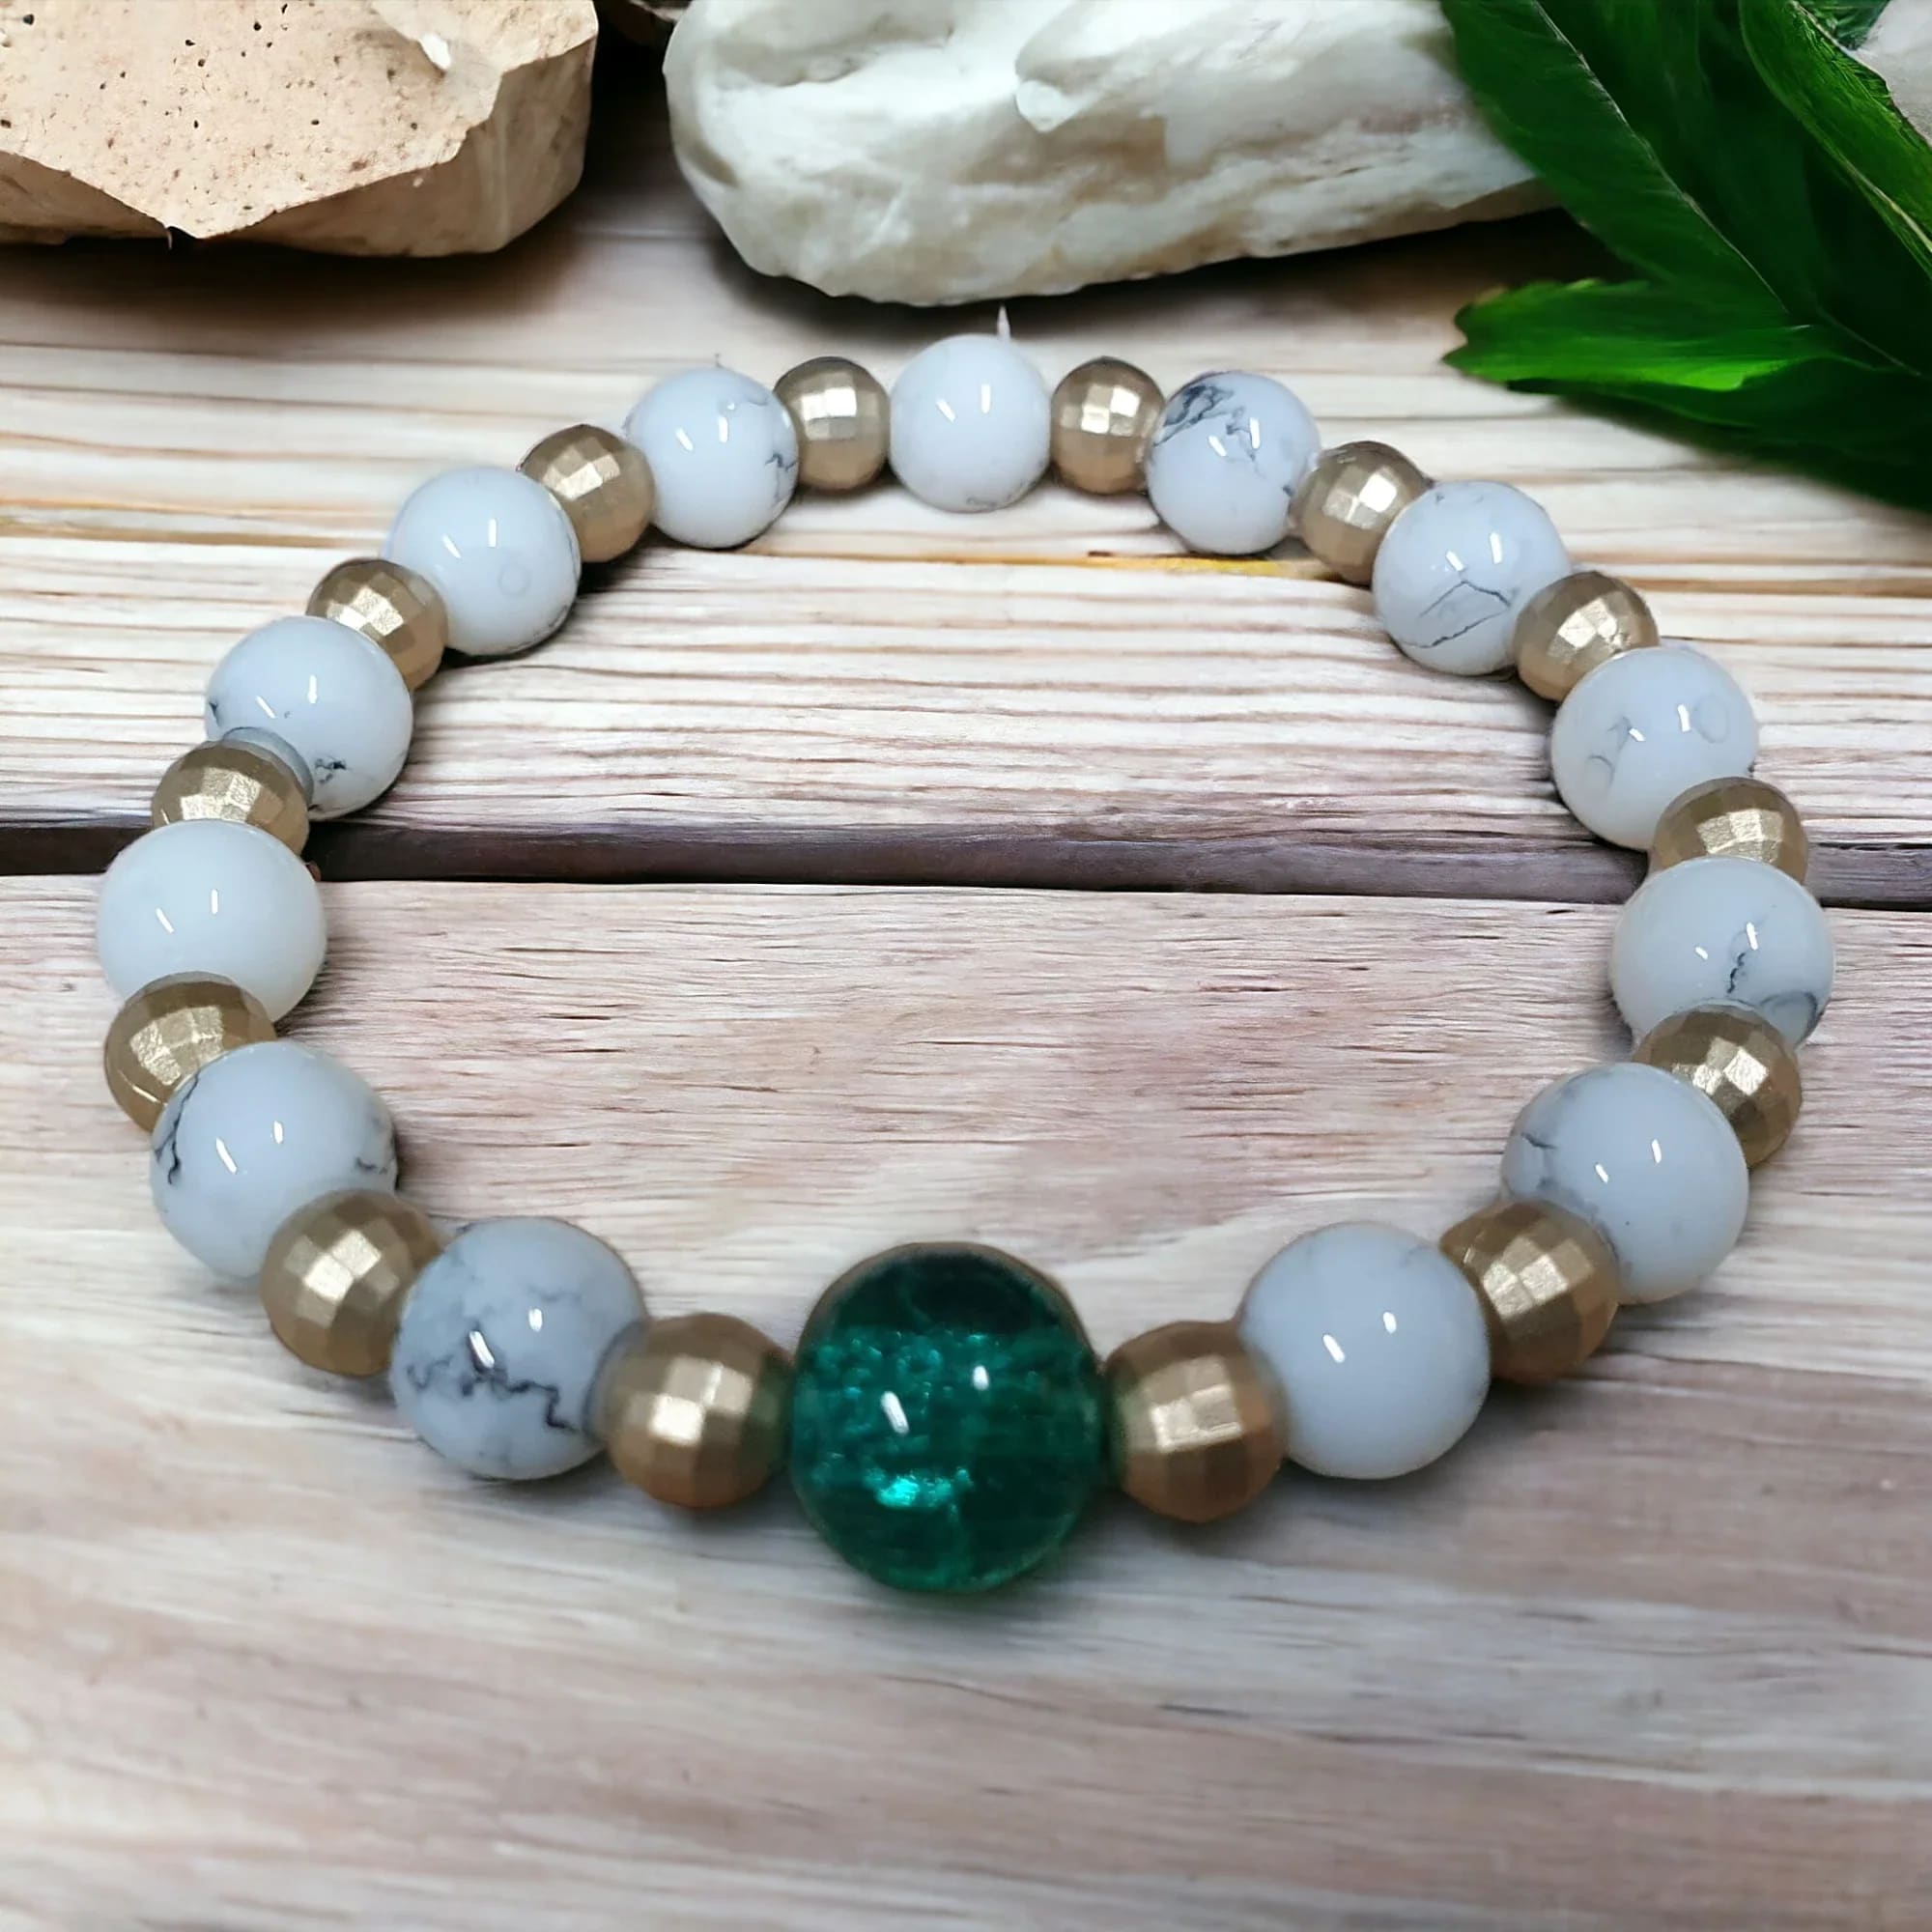 Unique Handmade Crafted Beaded Bracelet White Gold Gift